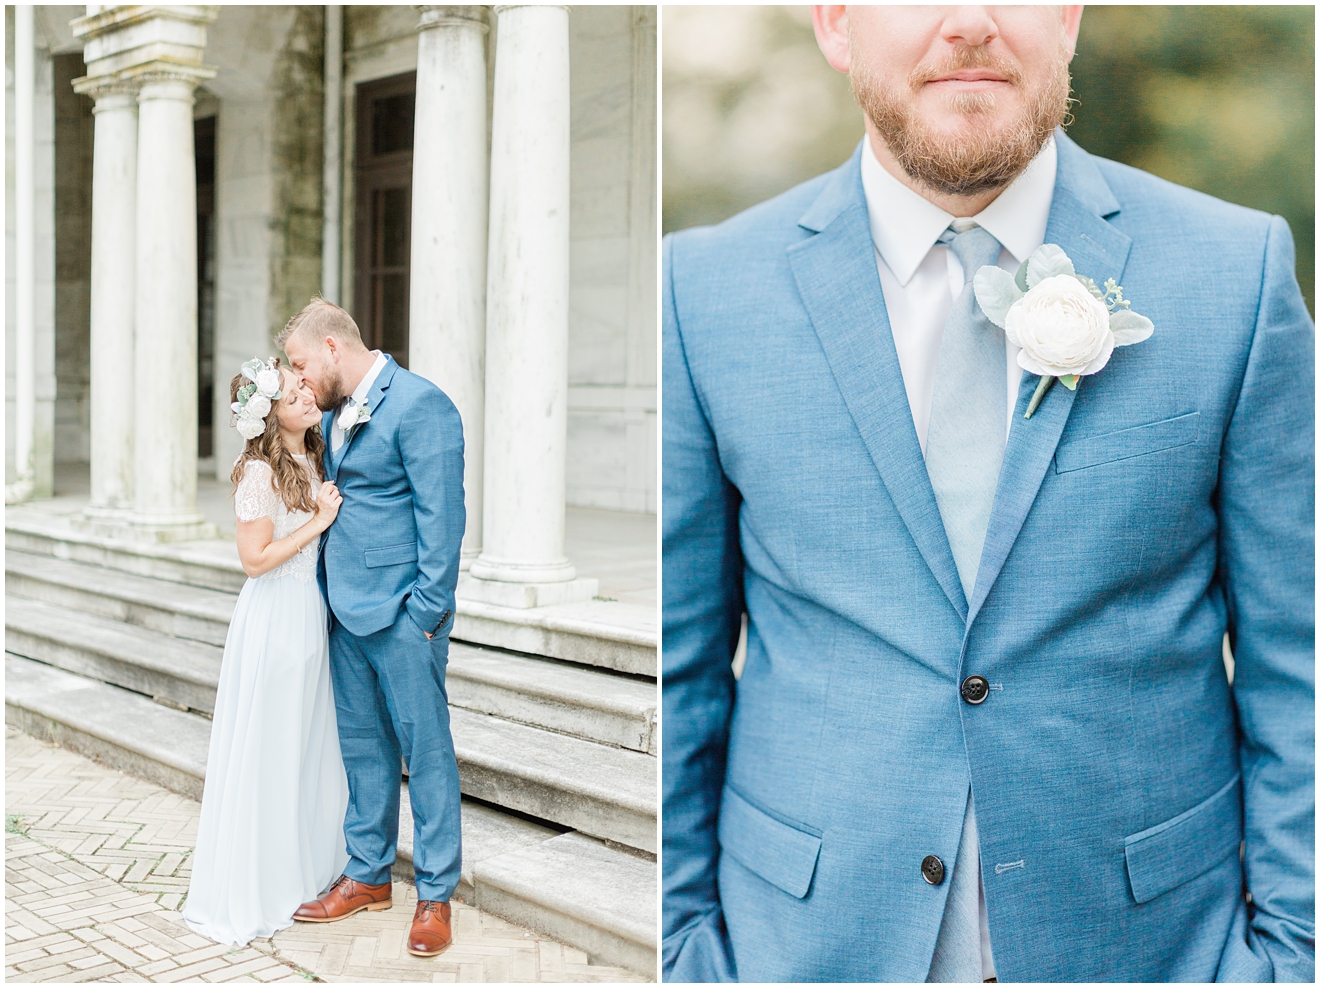 romantic-fine-art-wedding-elopement-anniversary-photos-in-blue-and-white